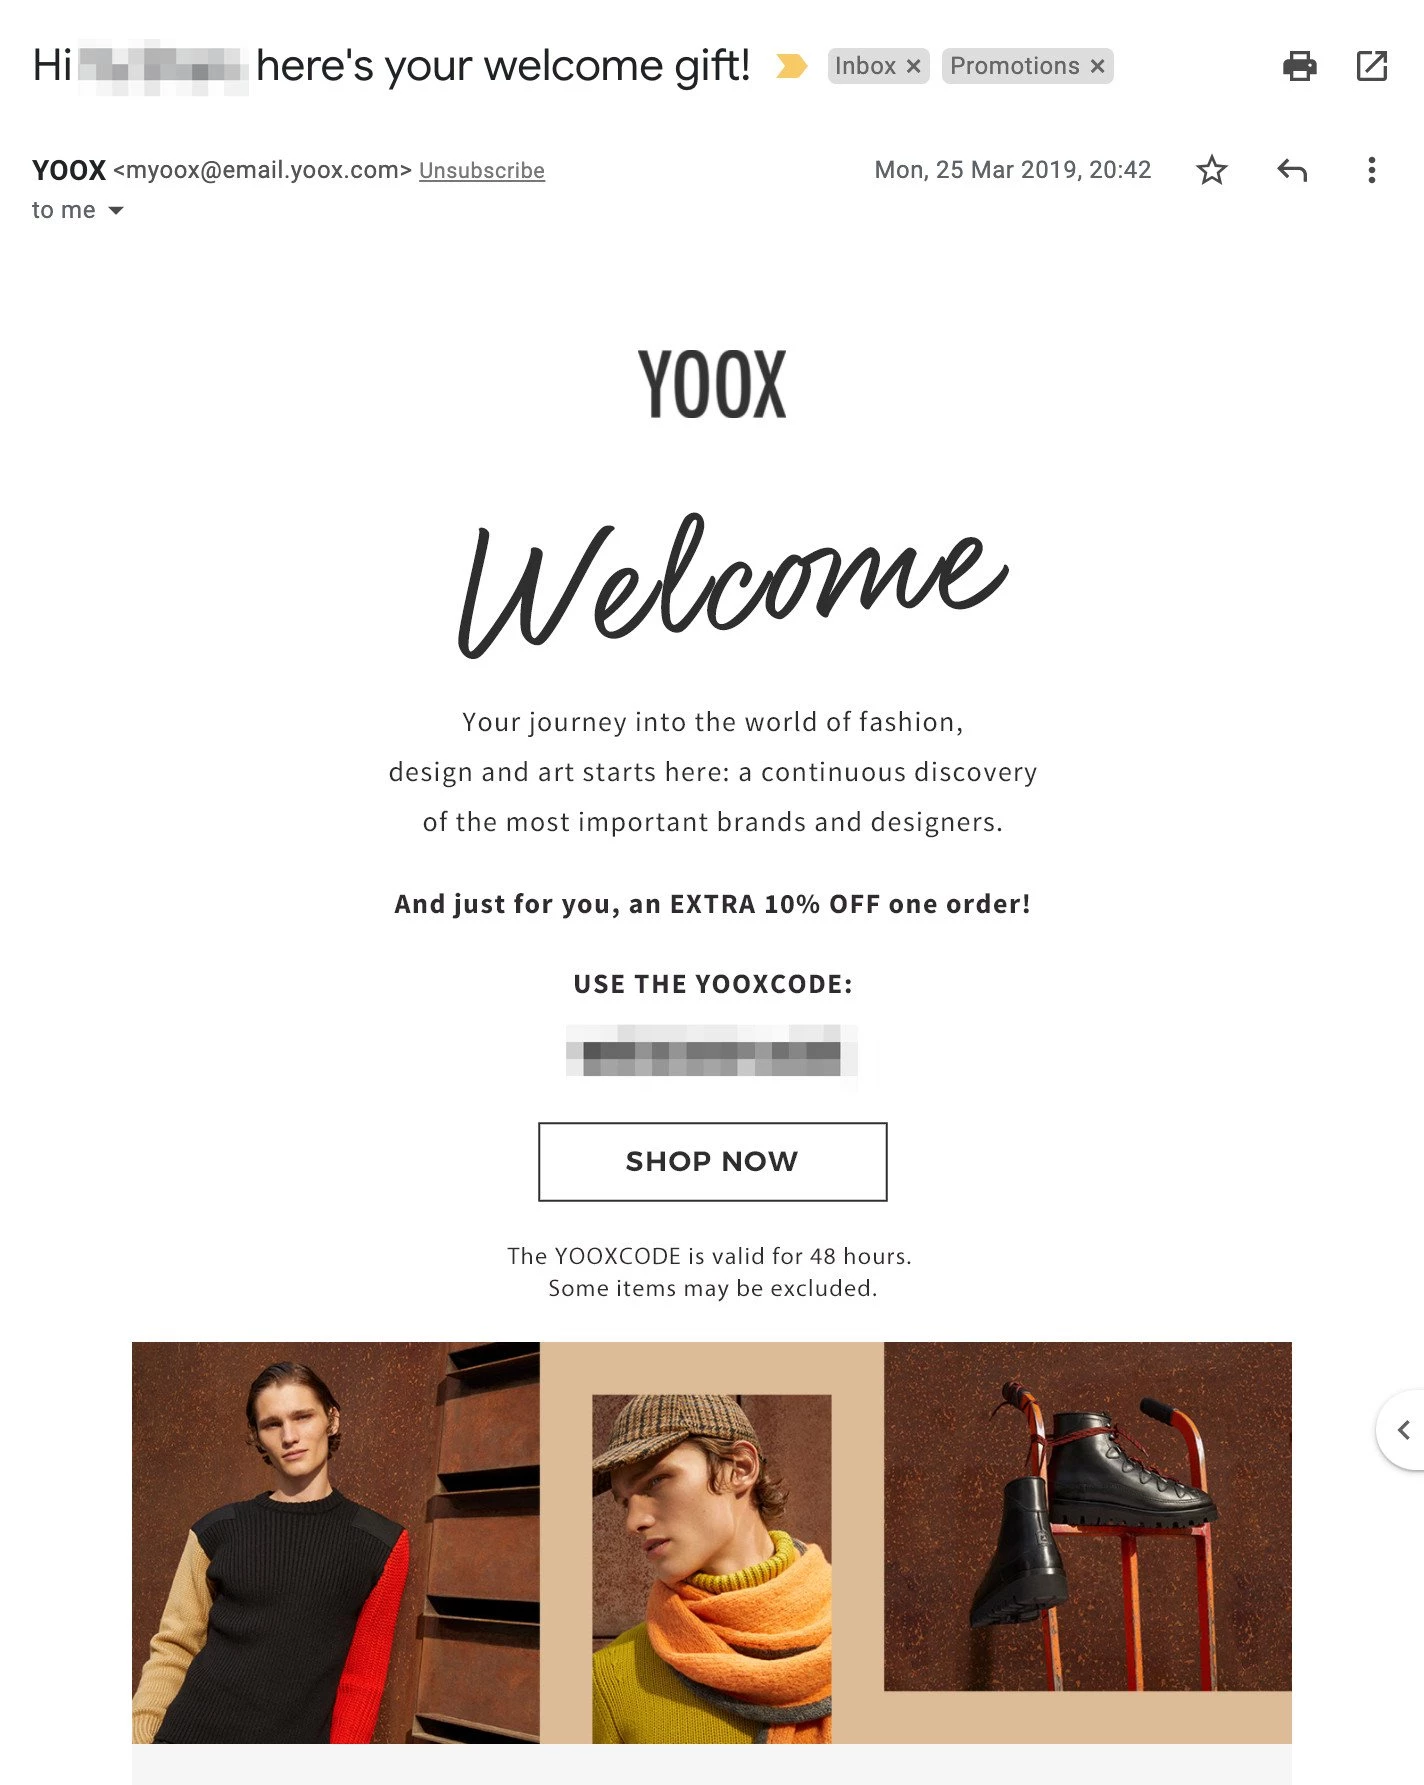 YOOX welcome email